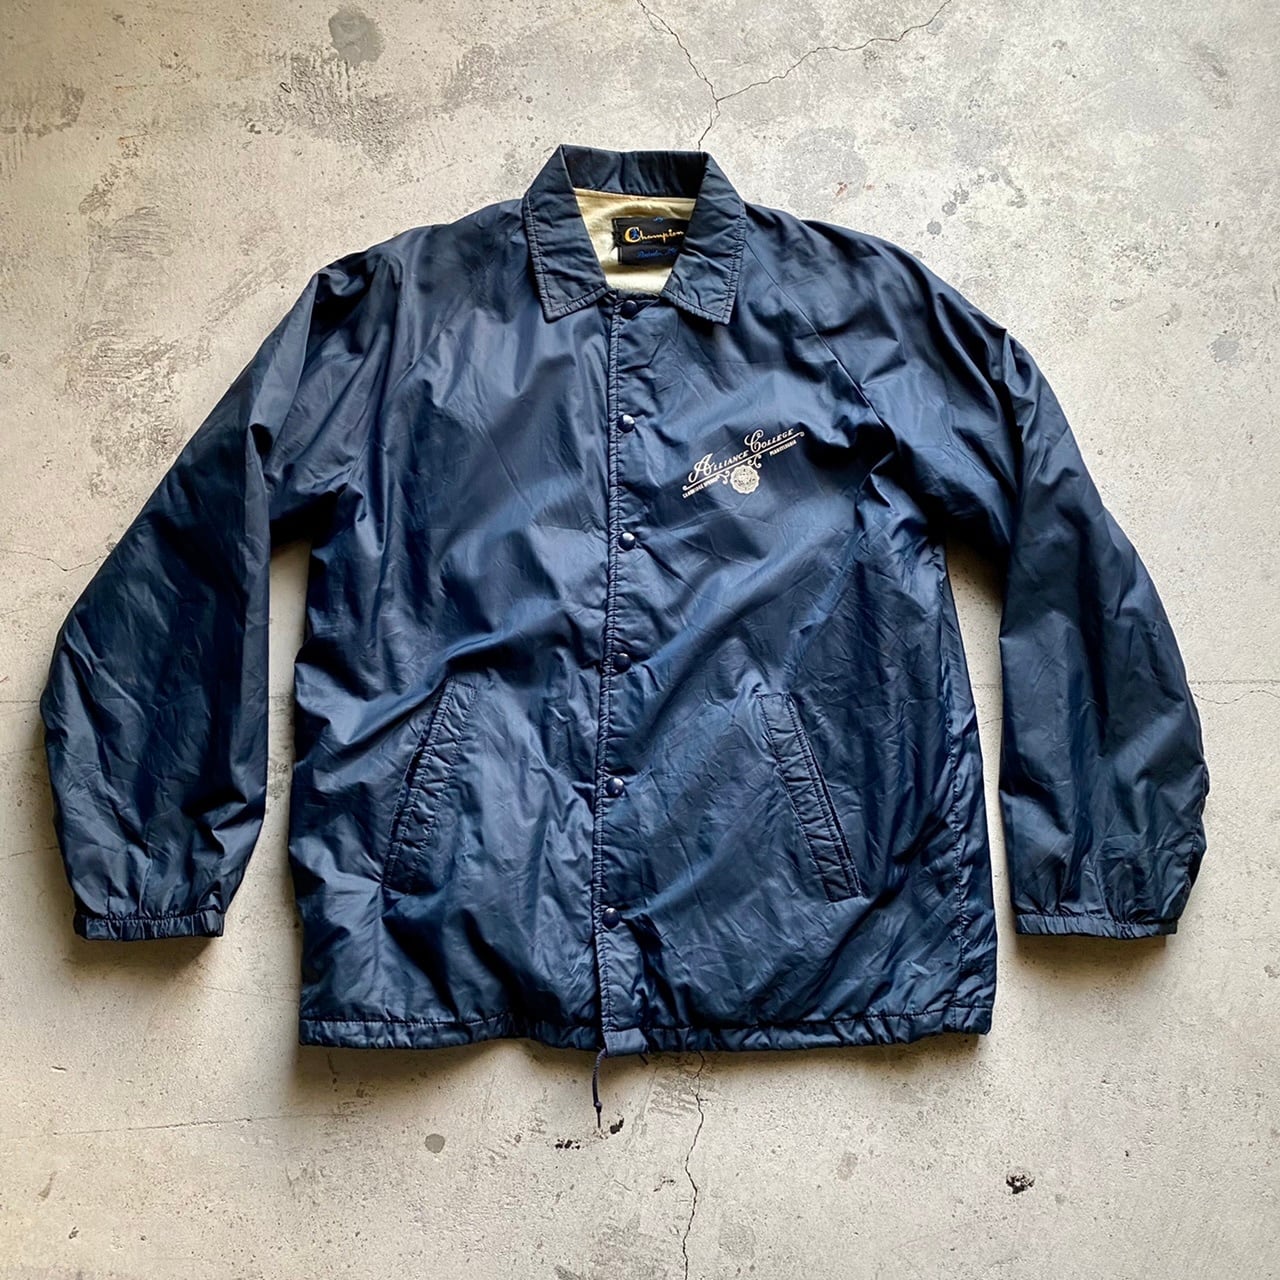 used vintage 60〜70s ヴィンテージ 古着 　チャンピオン　champion コーチ ジャケット アメリカ古着 COACH  JACKET | magazines webshop powered by BASE